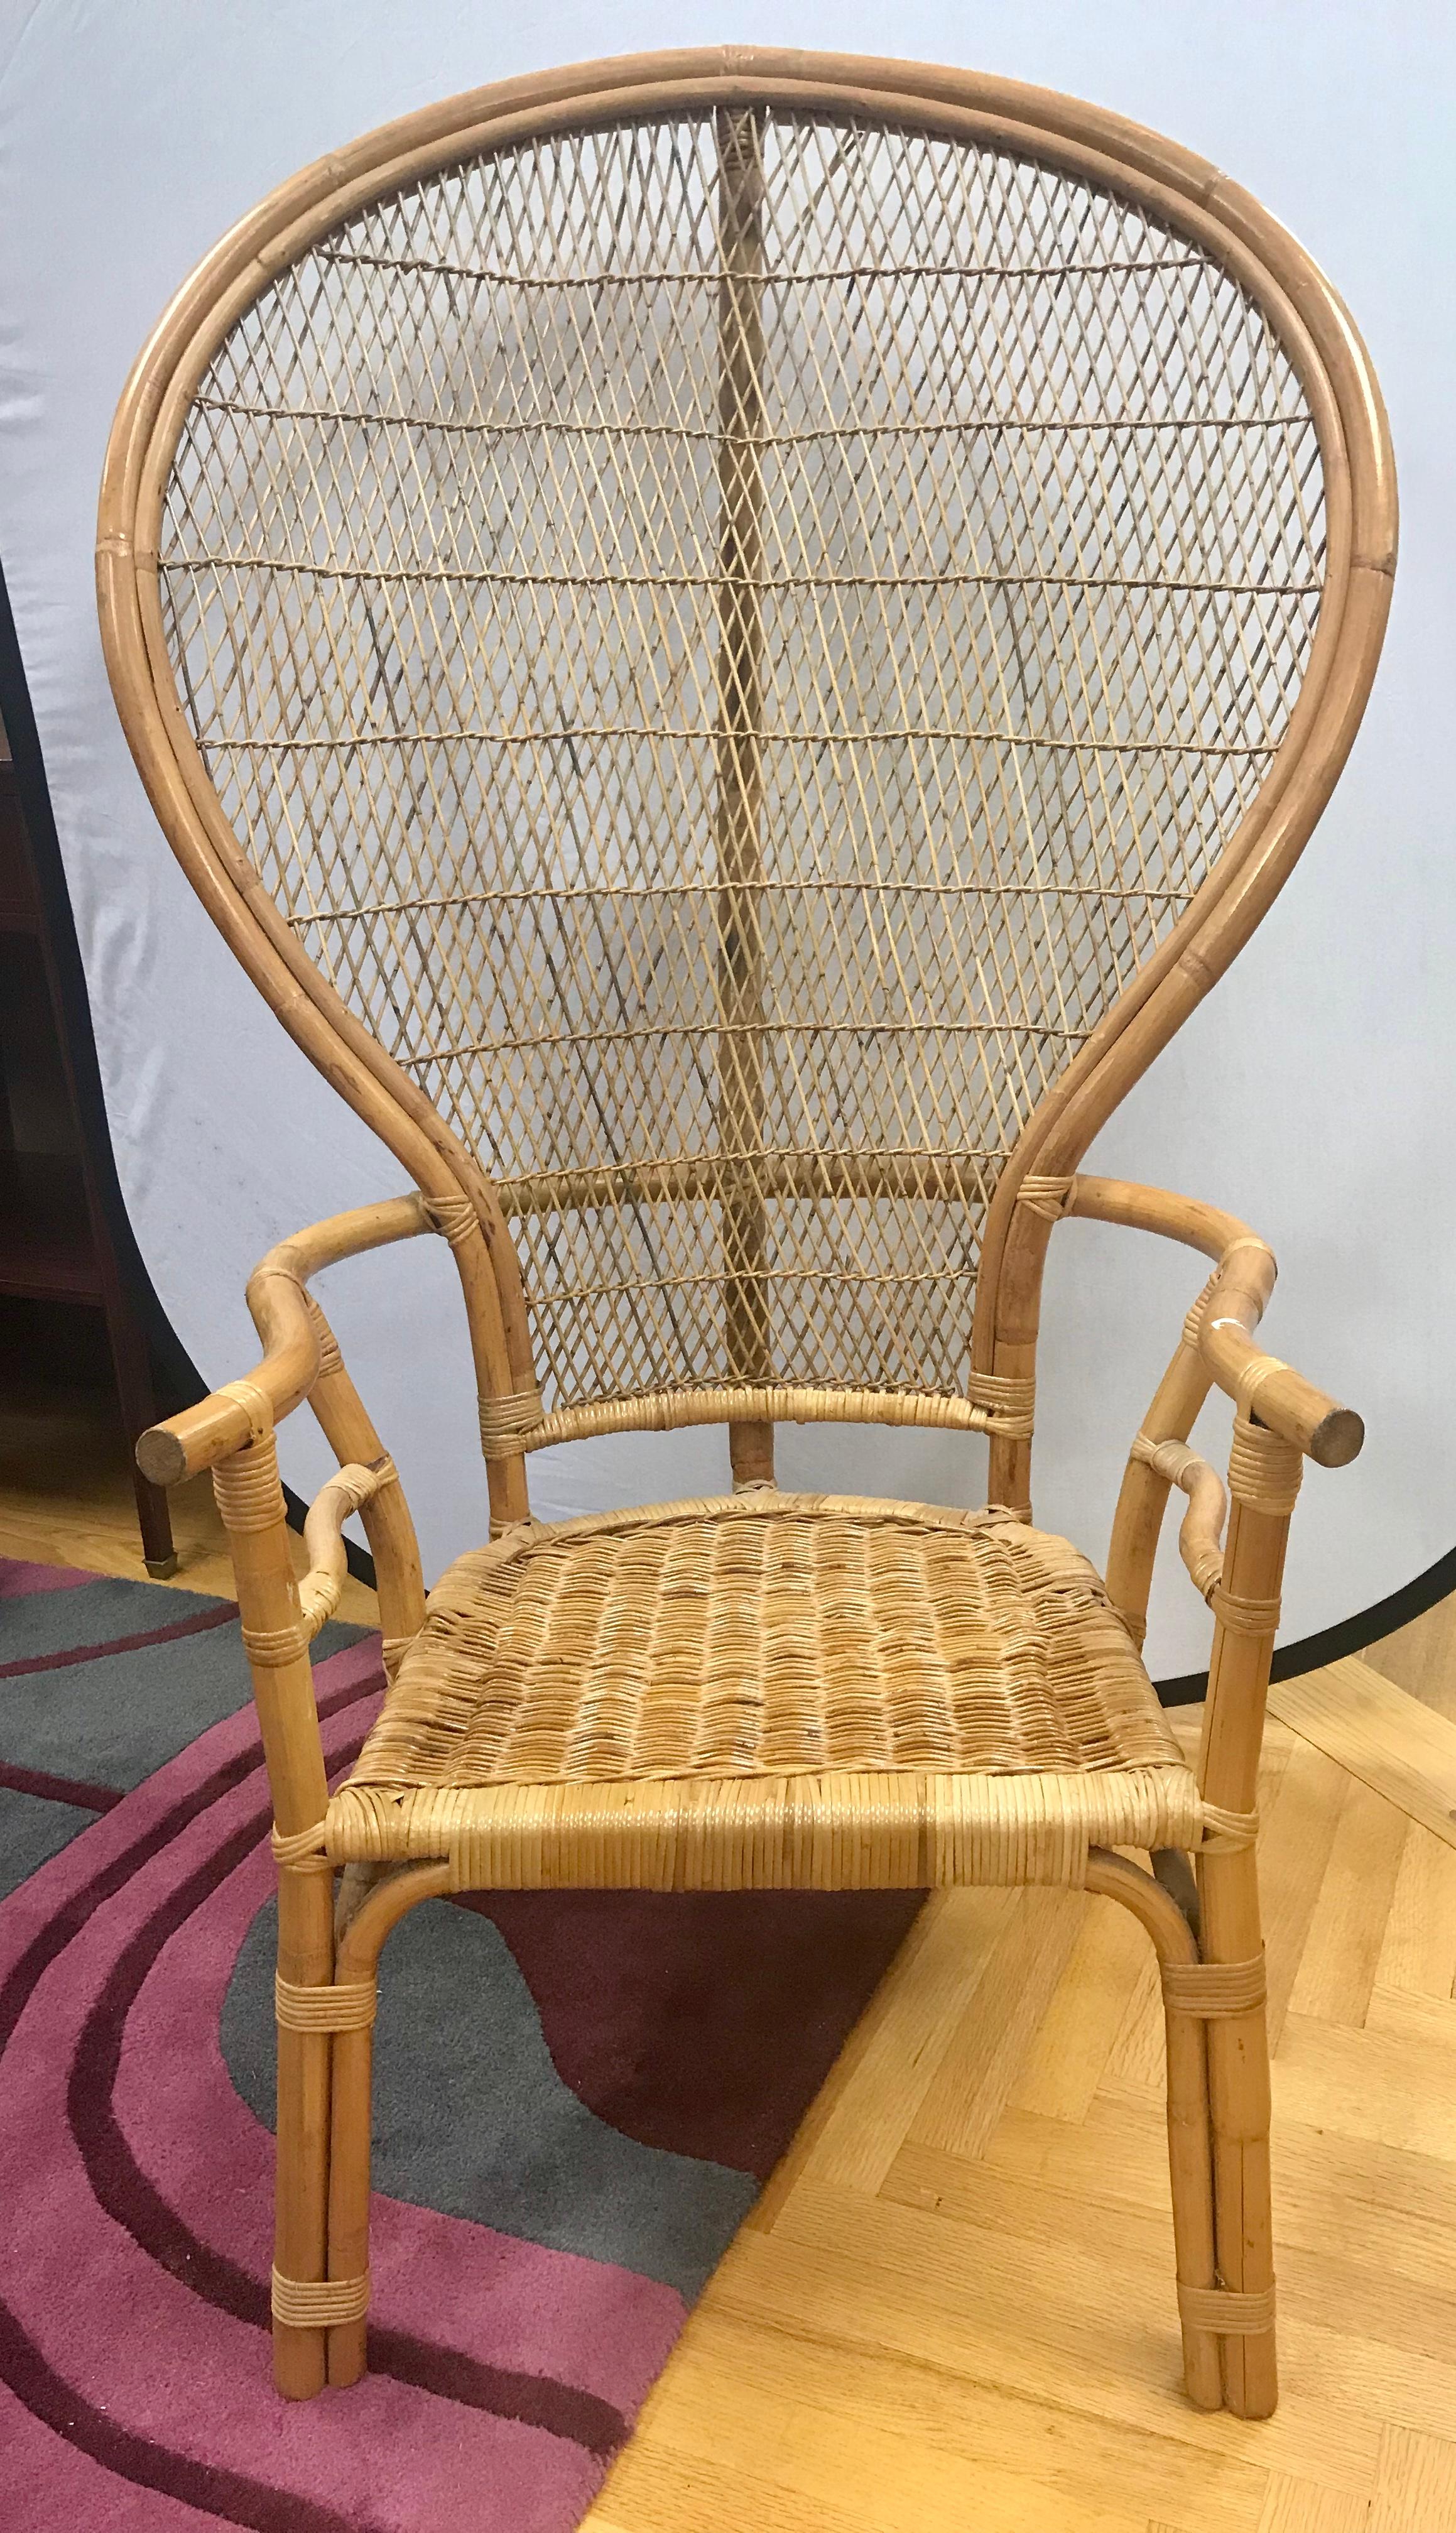 Coveted mid-century modern large wicker and rattan peacock chair.